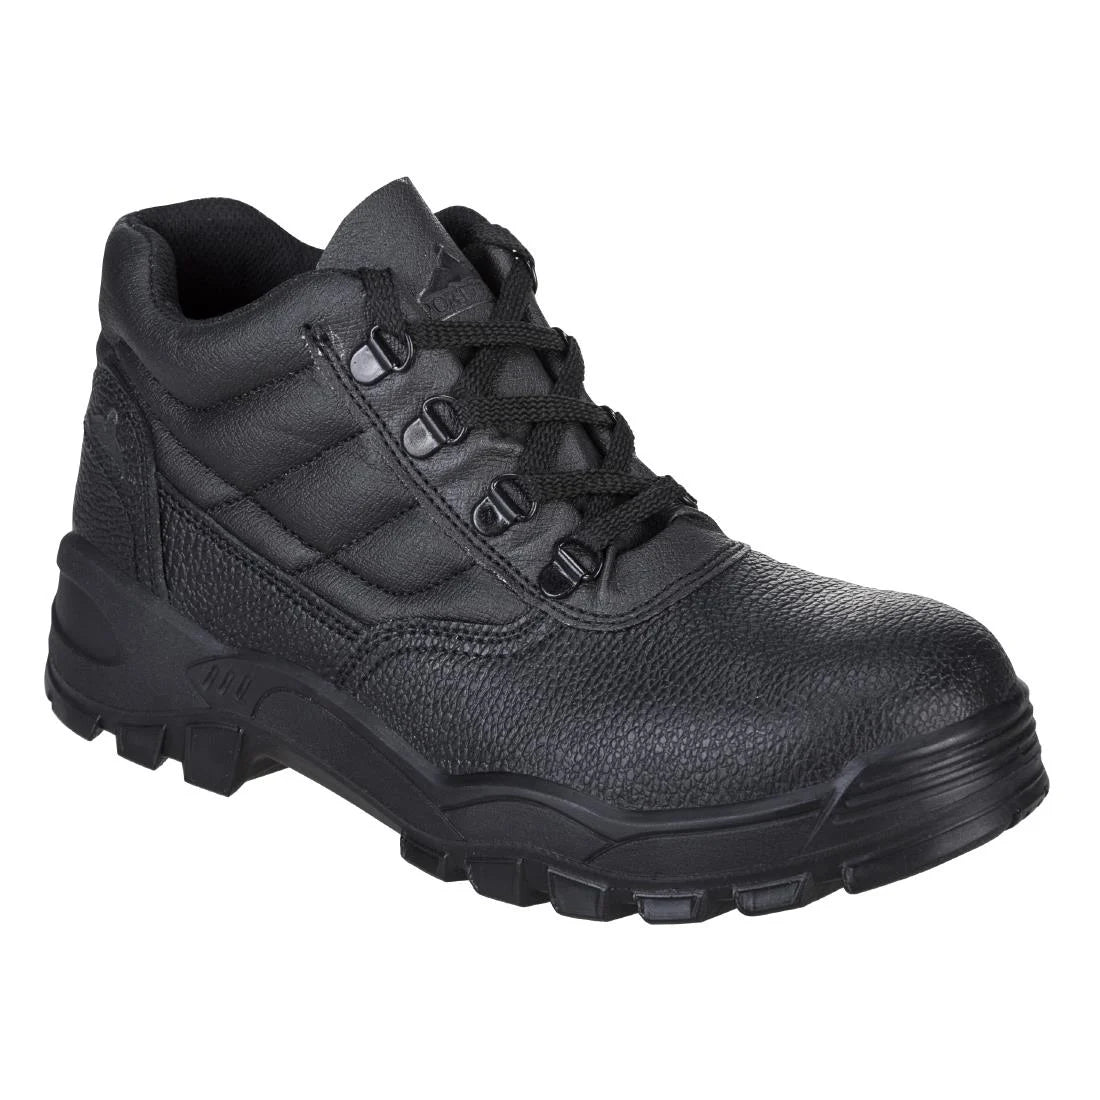 BA059-43 Portwest Protector Boot S1P Black Size 43 JD Catering Equipment Solutions Ltd